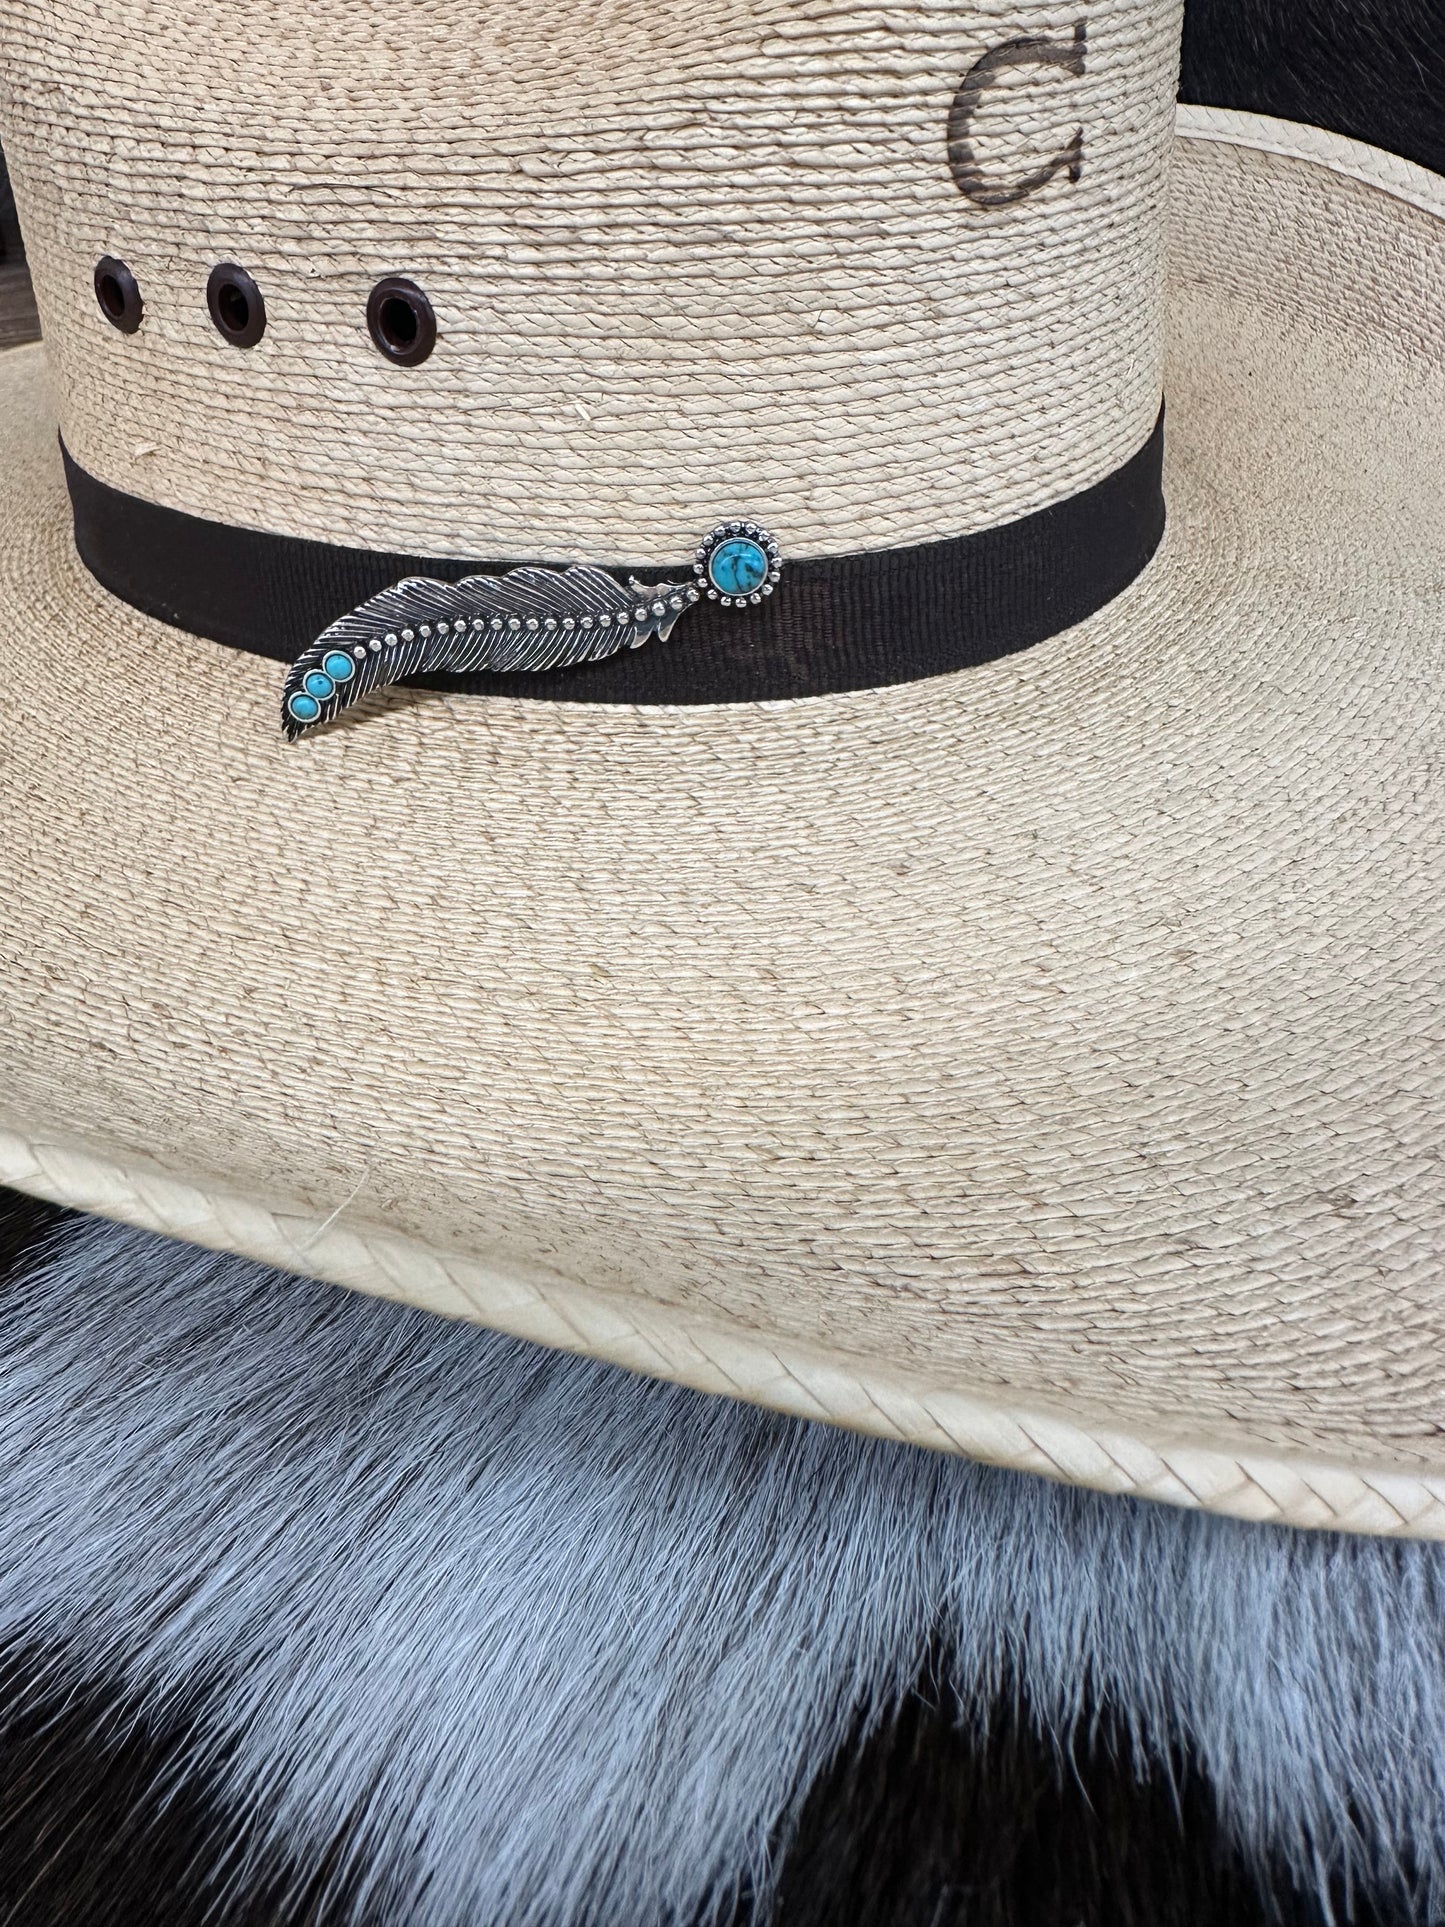 The Feather Hat Pin